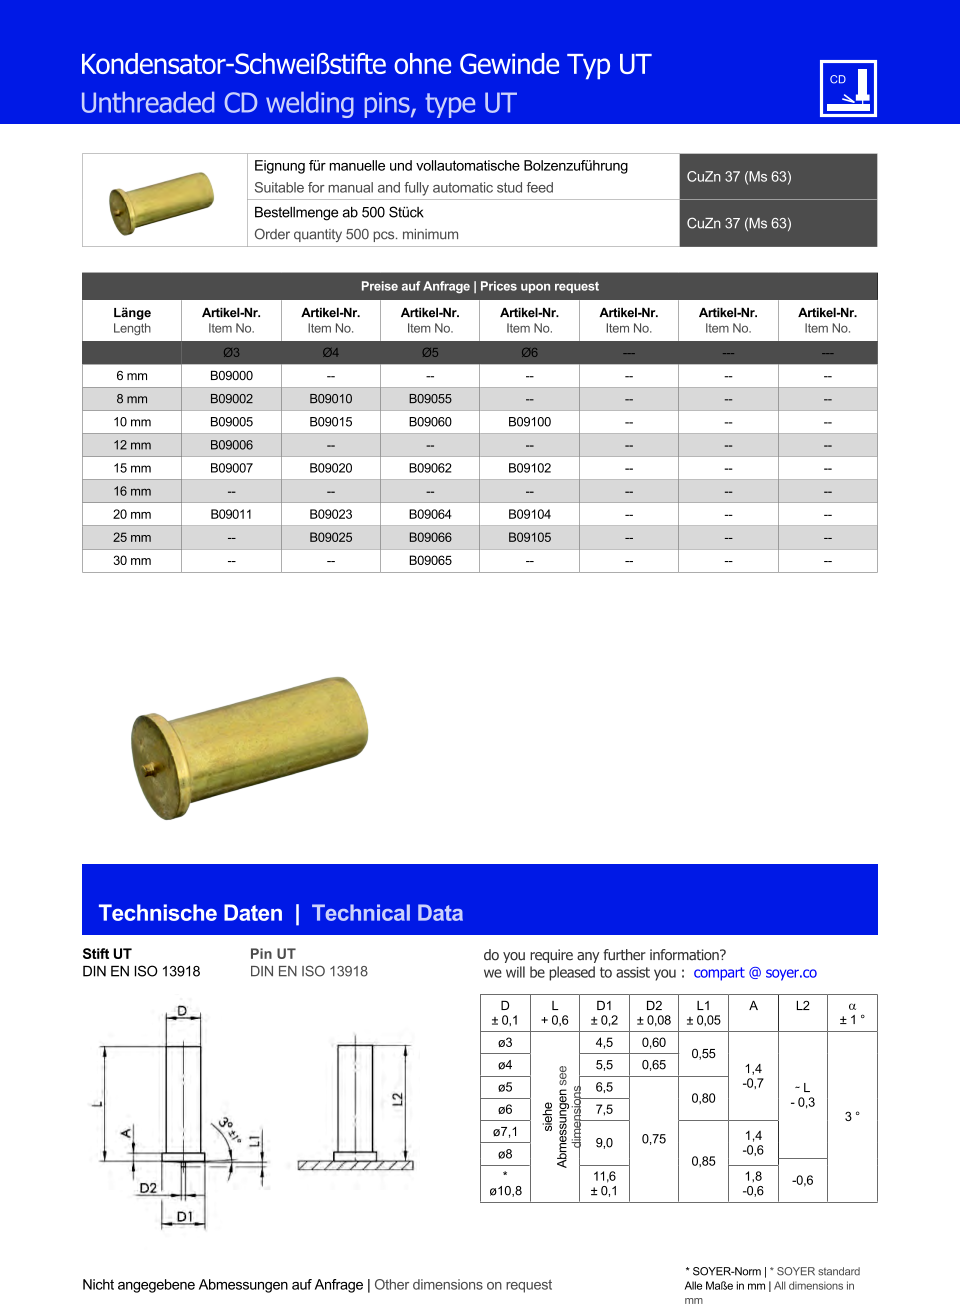 Eignung fr manuelle und vollautomatische Bolzenzufhrung Suitable for manual and fully automatic stud feed CuZn 37 (Ms 63)  Bestellmenge ab 500 Stck Order quantity 500 pcs. minimum CuZn 37 (Ms 63) Technische Daten  |  Technical Data Nicht angegebene Abmessungen auf Anfrage | Other dimensions on request * SOYER-Norm | * SOYER standard Alle Mae in mm | All dimensions in mm Kondensator-Schweistifte ohne Gewinde Typ UT Unthreaded CD welding pins, type UT Preise auf Anfrage | Prices upon request  Lnge Length Artikel-Nr. Item No. Artikel-Nr. Item No. Artikel-Nr. Item No. Artikel-Nr. Item No. Artikel-Nr. Item No. Artikel-Nr. Item No. Artikel-Nr. Item No. Ø3 Ø4 Ø5 Ø6 --- --- --- 6 mm 	B09000 -- -- 	-- 	-- 	-- 	-- 8 mm 	B09002 	B09010 	B09055 	-- 	-- 	-- 	-- 10 mm 	B09005 	B09015 	B09060 B09100 	-- 	-- 	-- 12 mm 	B09006 -- -- -- 	-- 	-- 	-- 15 mm 	B09007 B09020 B09062 B09102 	-- 	-- 	-- 16 mm -- -- -- -- 	-- 	-- 	-- 20 mm B09011 	B09023 	B09064 	B09104 	-- 	-- 	-- 25 mm 	-- 	B09025 	B09066 	B09105 	-- 	-- 	-- 30 mm 	-- -- 	B09065 -- 	-- 	-- 	-- Stift UT DIN EN ISO 13918 Pin UT DIN EN ISO 13918 D  0,1 L + 0,6 D1  0,2 D2  0,08 L1  0,05 A L2   1  ø3 siehe Abmessungen see dimensions 4,5 0,60 0,55 1,4 -0,7 ˜ L - 0,3 3  ø4 	5,5 0,65 ø5 	6,5 0,75 0,80 ø6 7,5 ø7,1 9,0 0,85 1,4 ø8 -0,6 * -0,6 ø10,8 11,6  0,1 1,8 -0,6 do you require any further information?  we will be pleased to assist you :  compart @ soyer.co